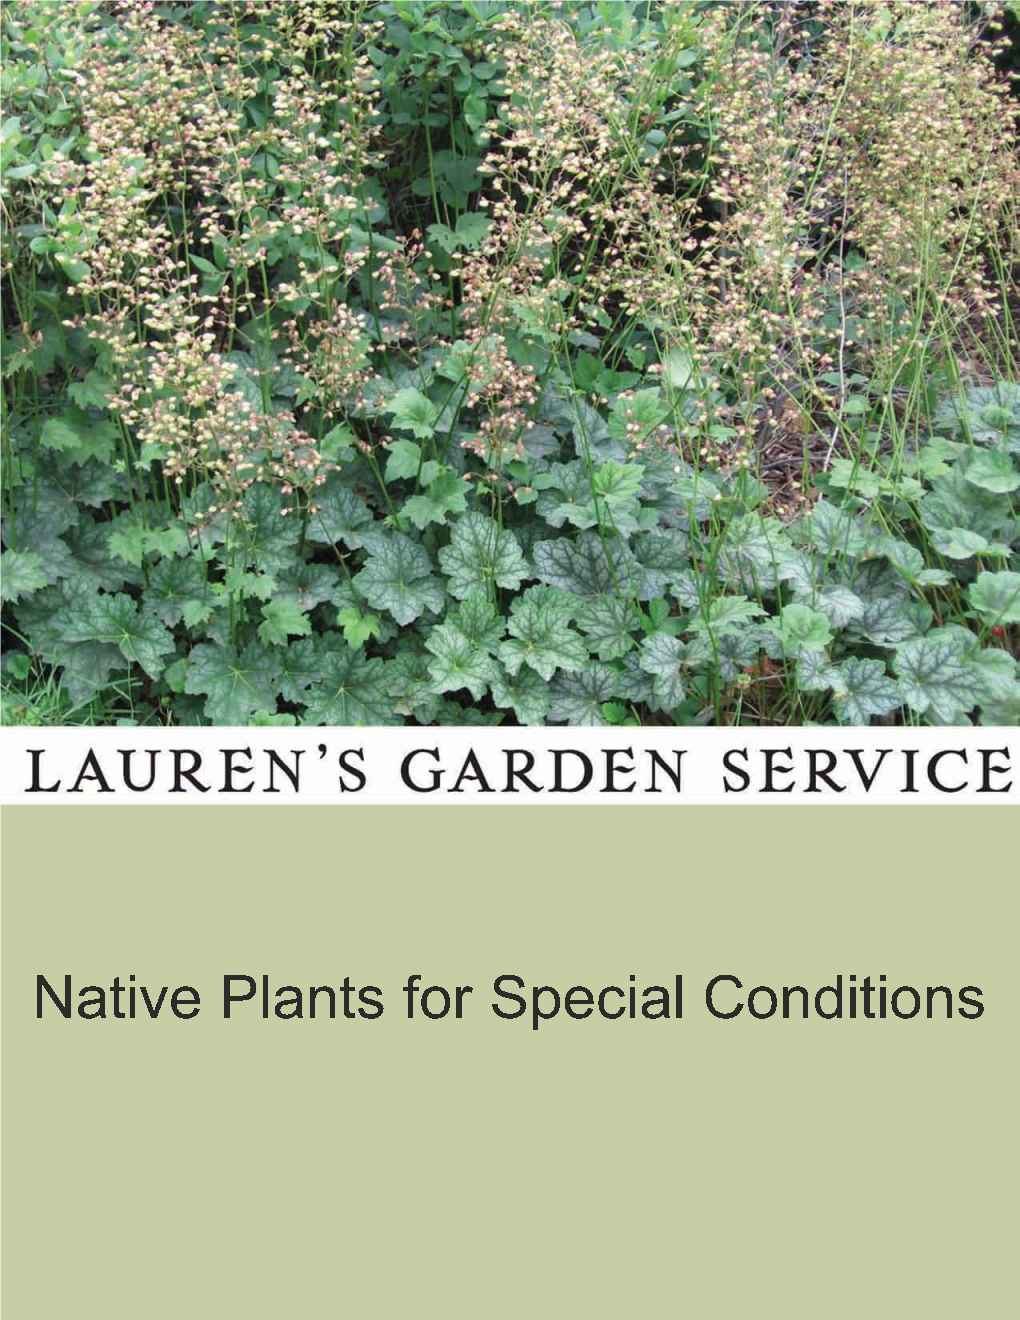 Locally Native Plants That Attract Bees